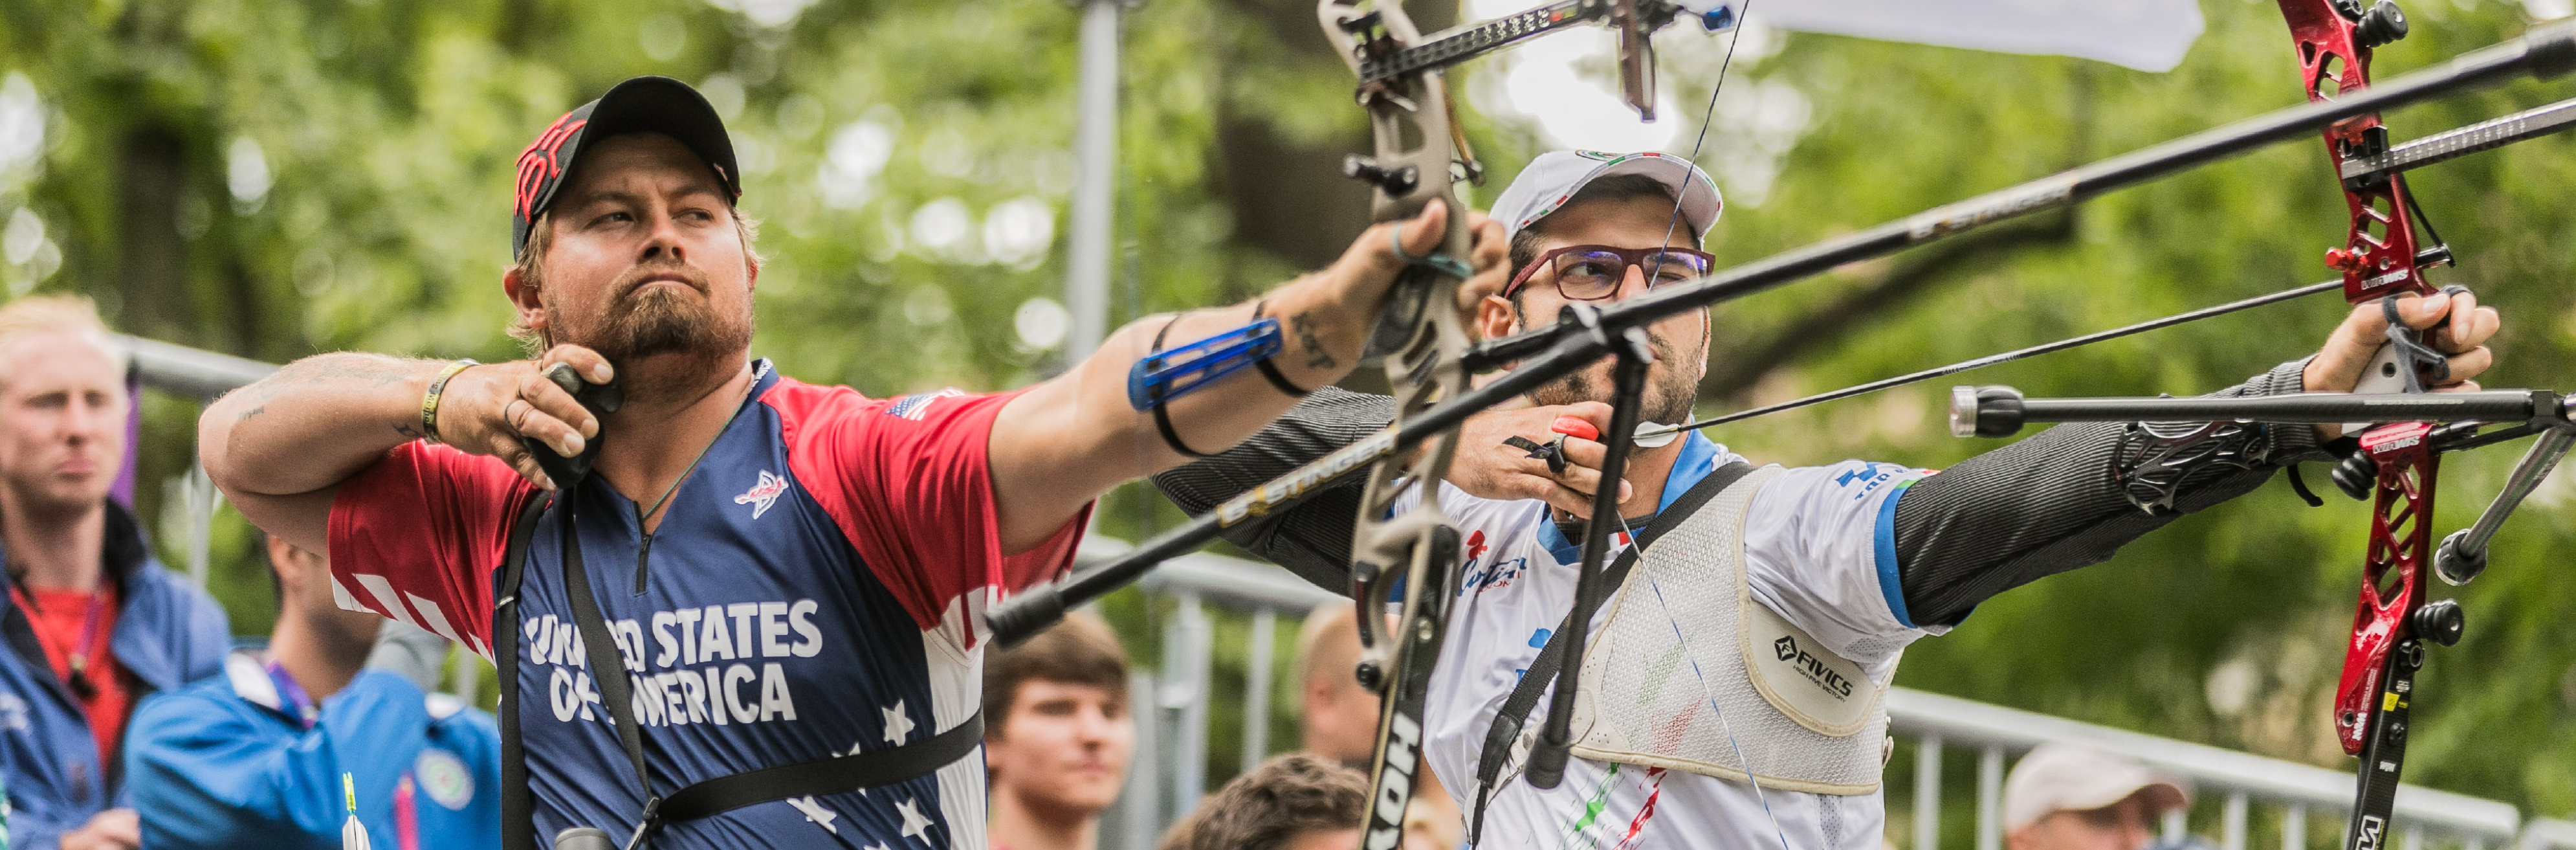 Archery - The World Games 2022